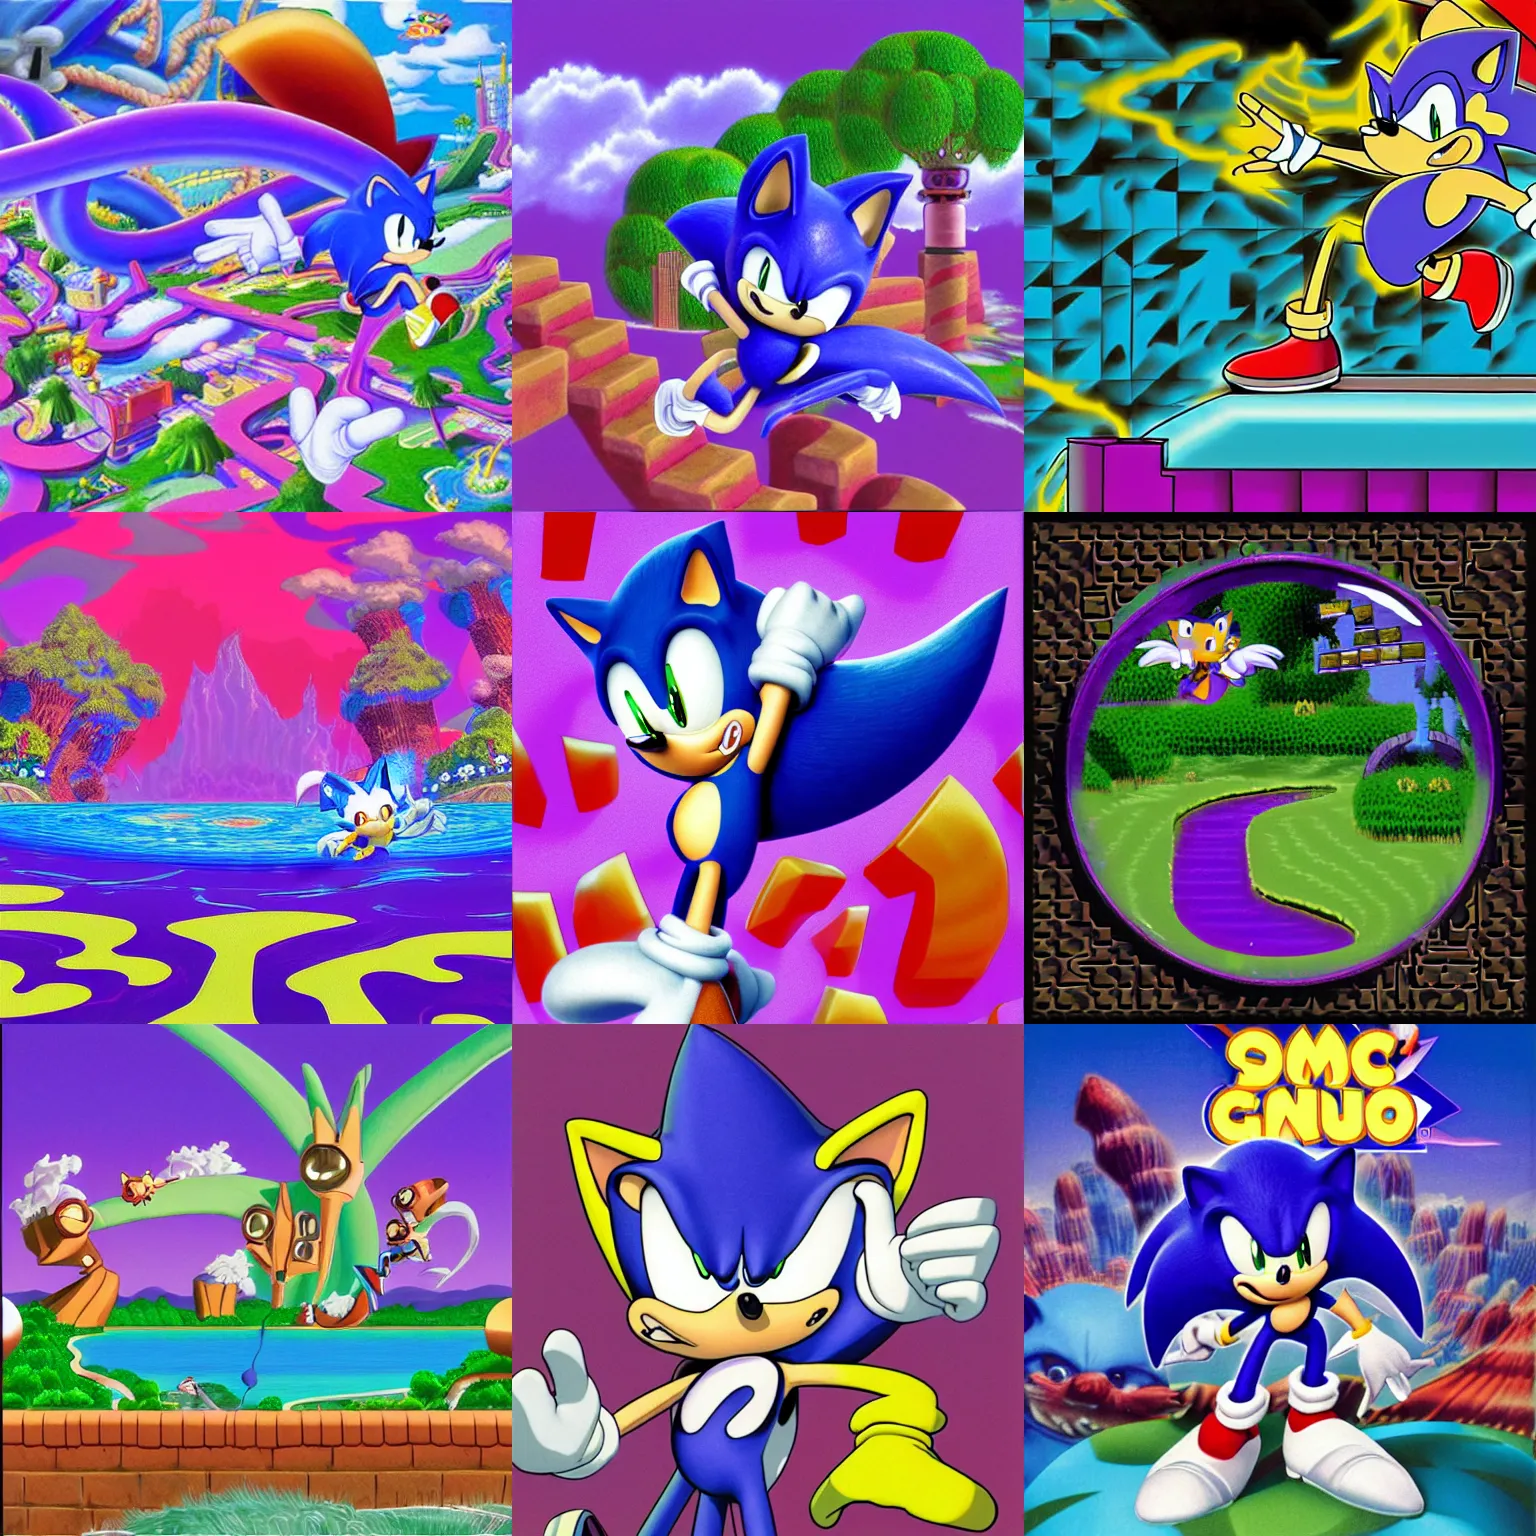 Prompt: animation smear of sonic hedgehog and a matte painting landscape of a surreal, sharp, detailed professional, soft pastels, high quality airbrush art album cover of a liquid dissolving airbrush art lsd dmt sonic the hedgehog swimming through cyberspace, purple checkerboard background, 1 9 9 0 s 1 9 9 2 sega genesis rareware video game album cover